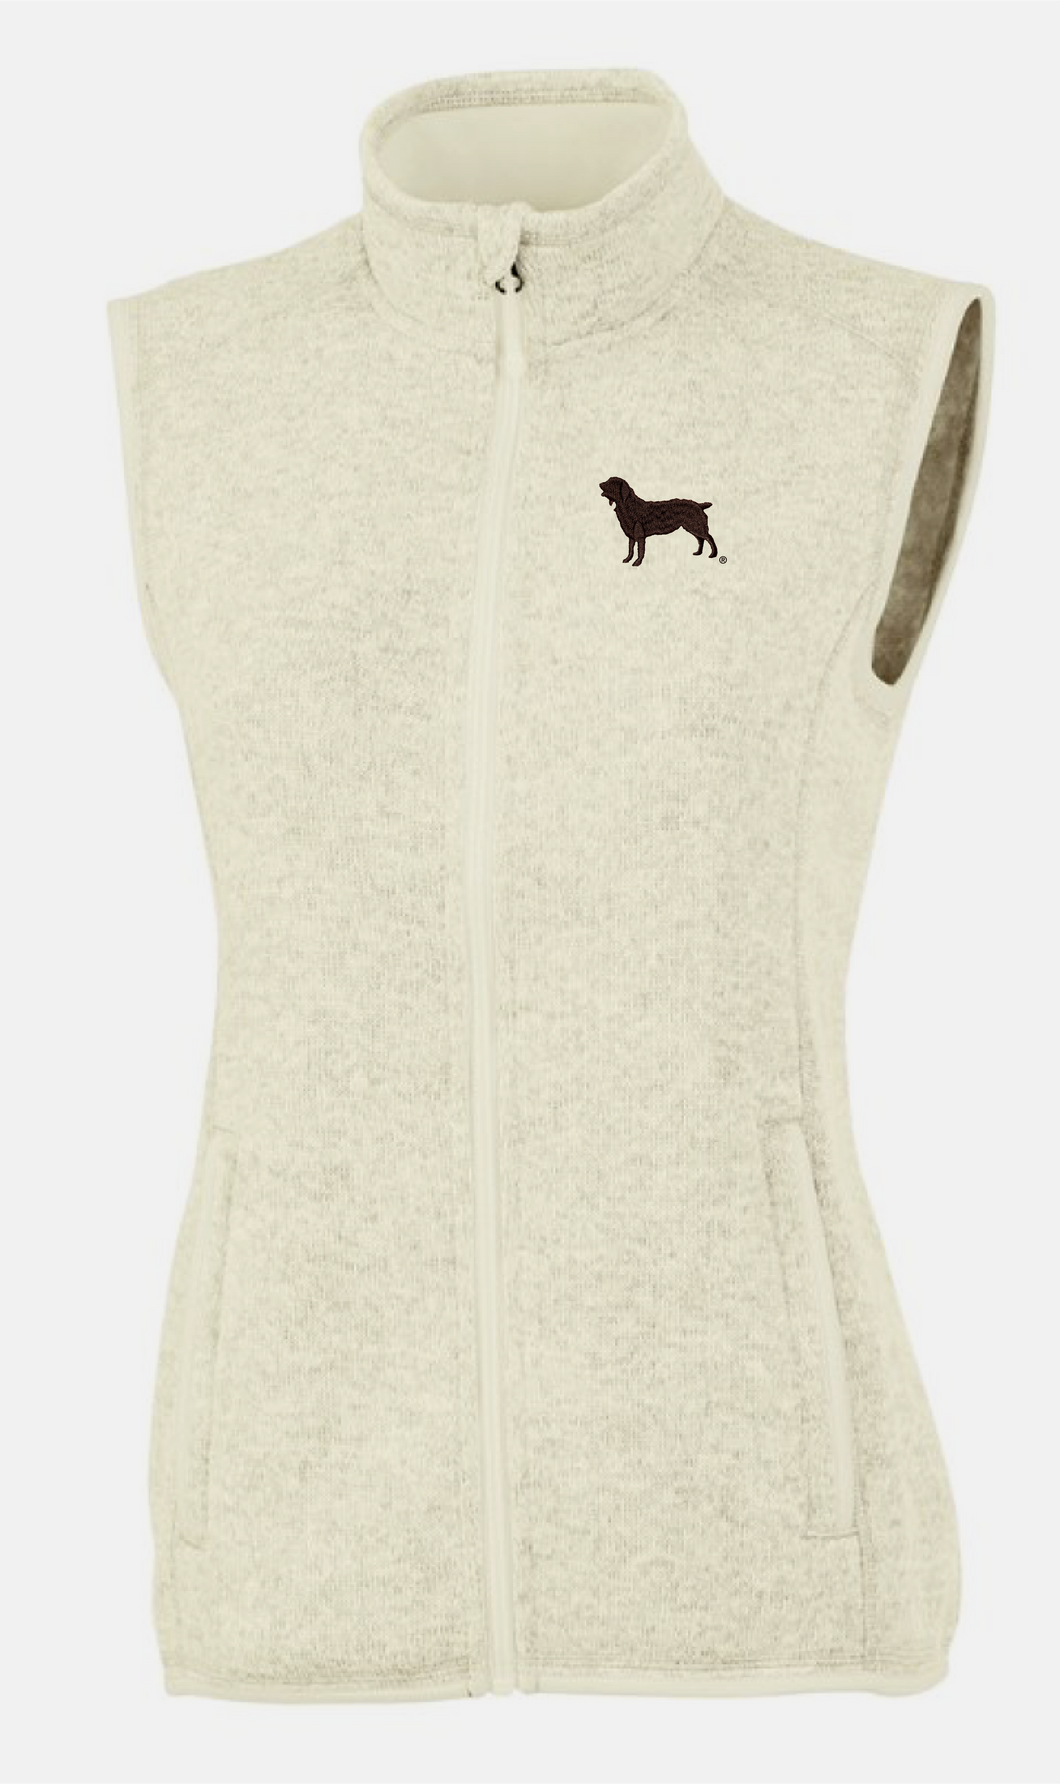 Womens Pacific Heathered Vest with Boykin Spaniel Society Official Silhouette (3 colors)